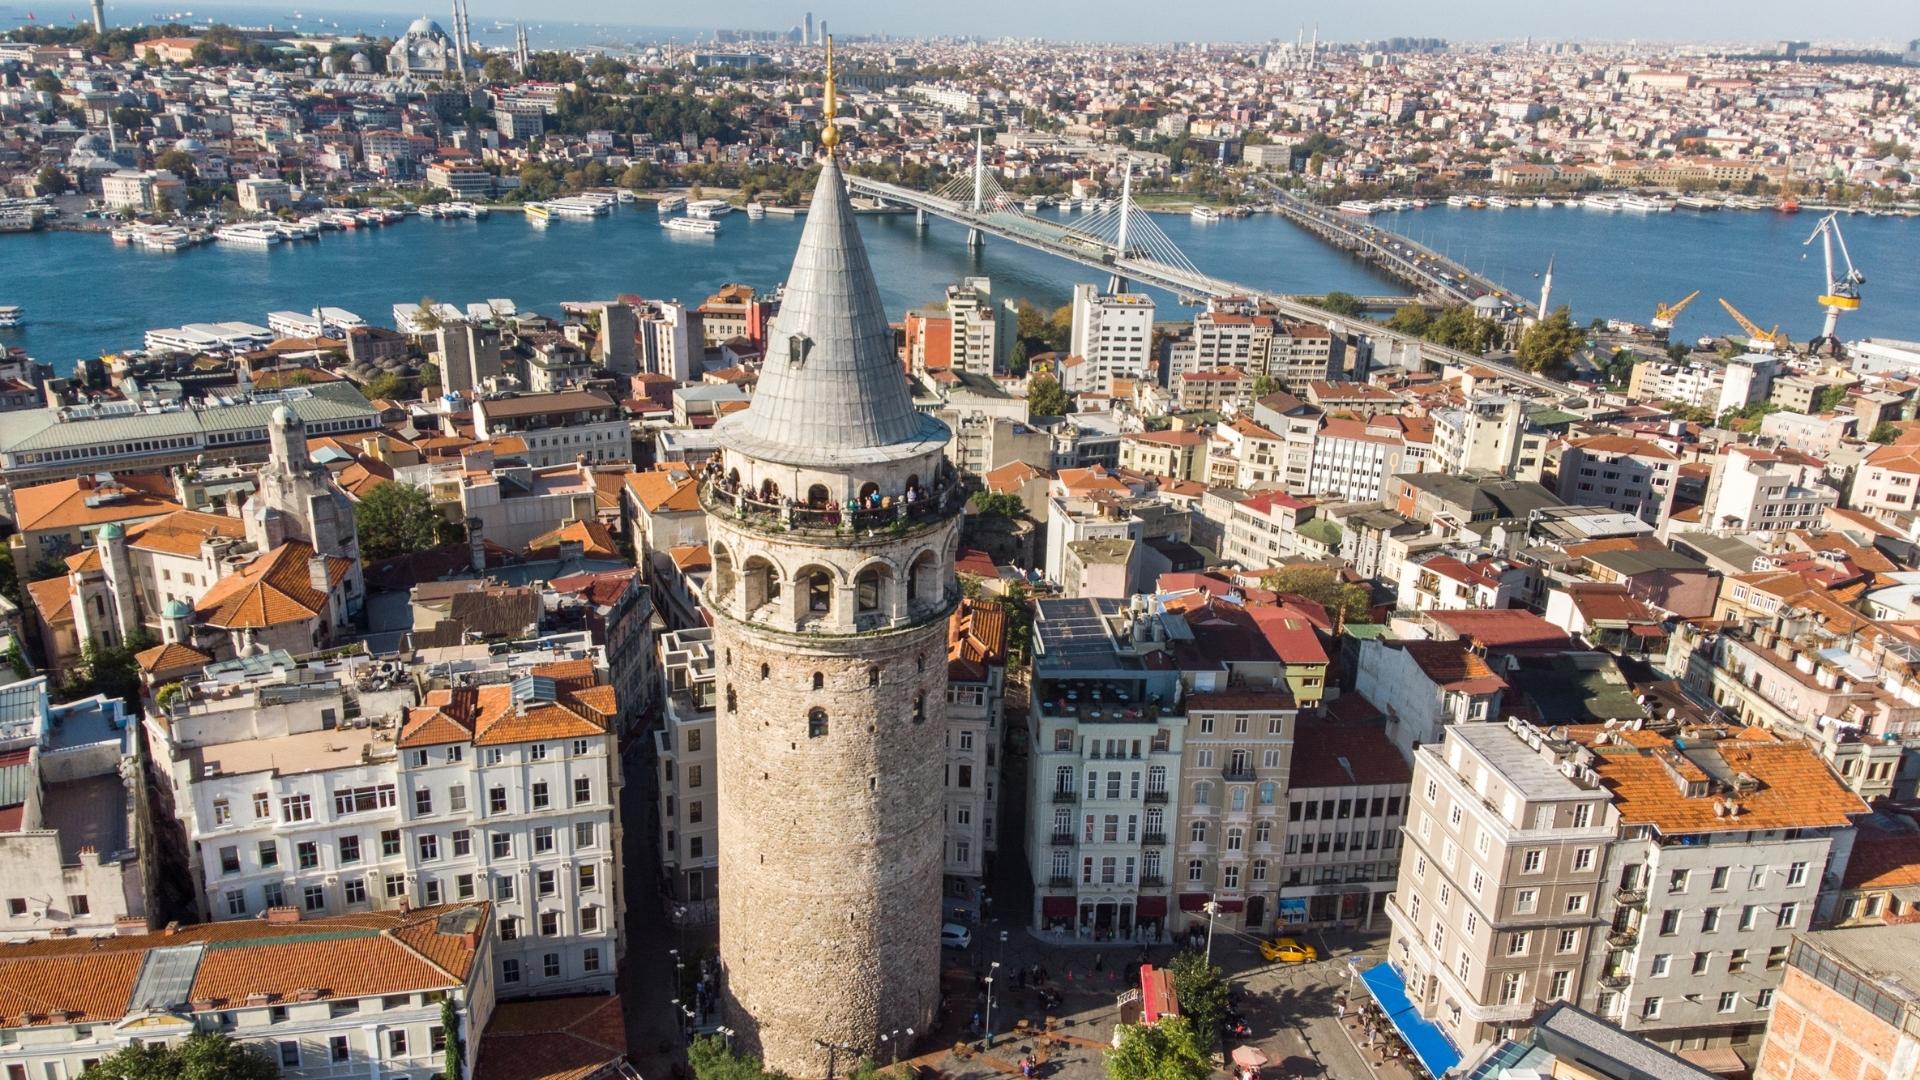 Things to do in İstanbul - Galata Tower